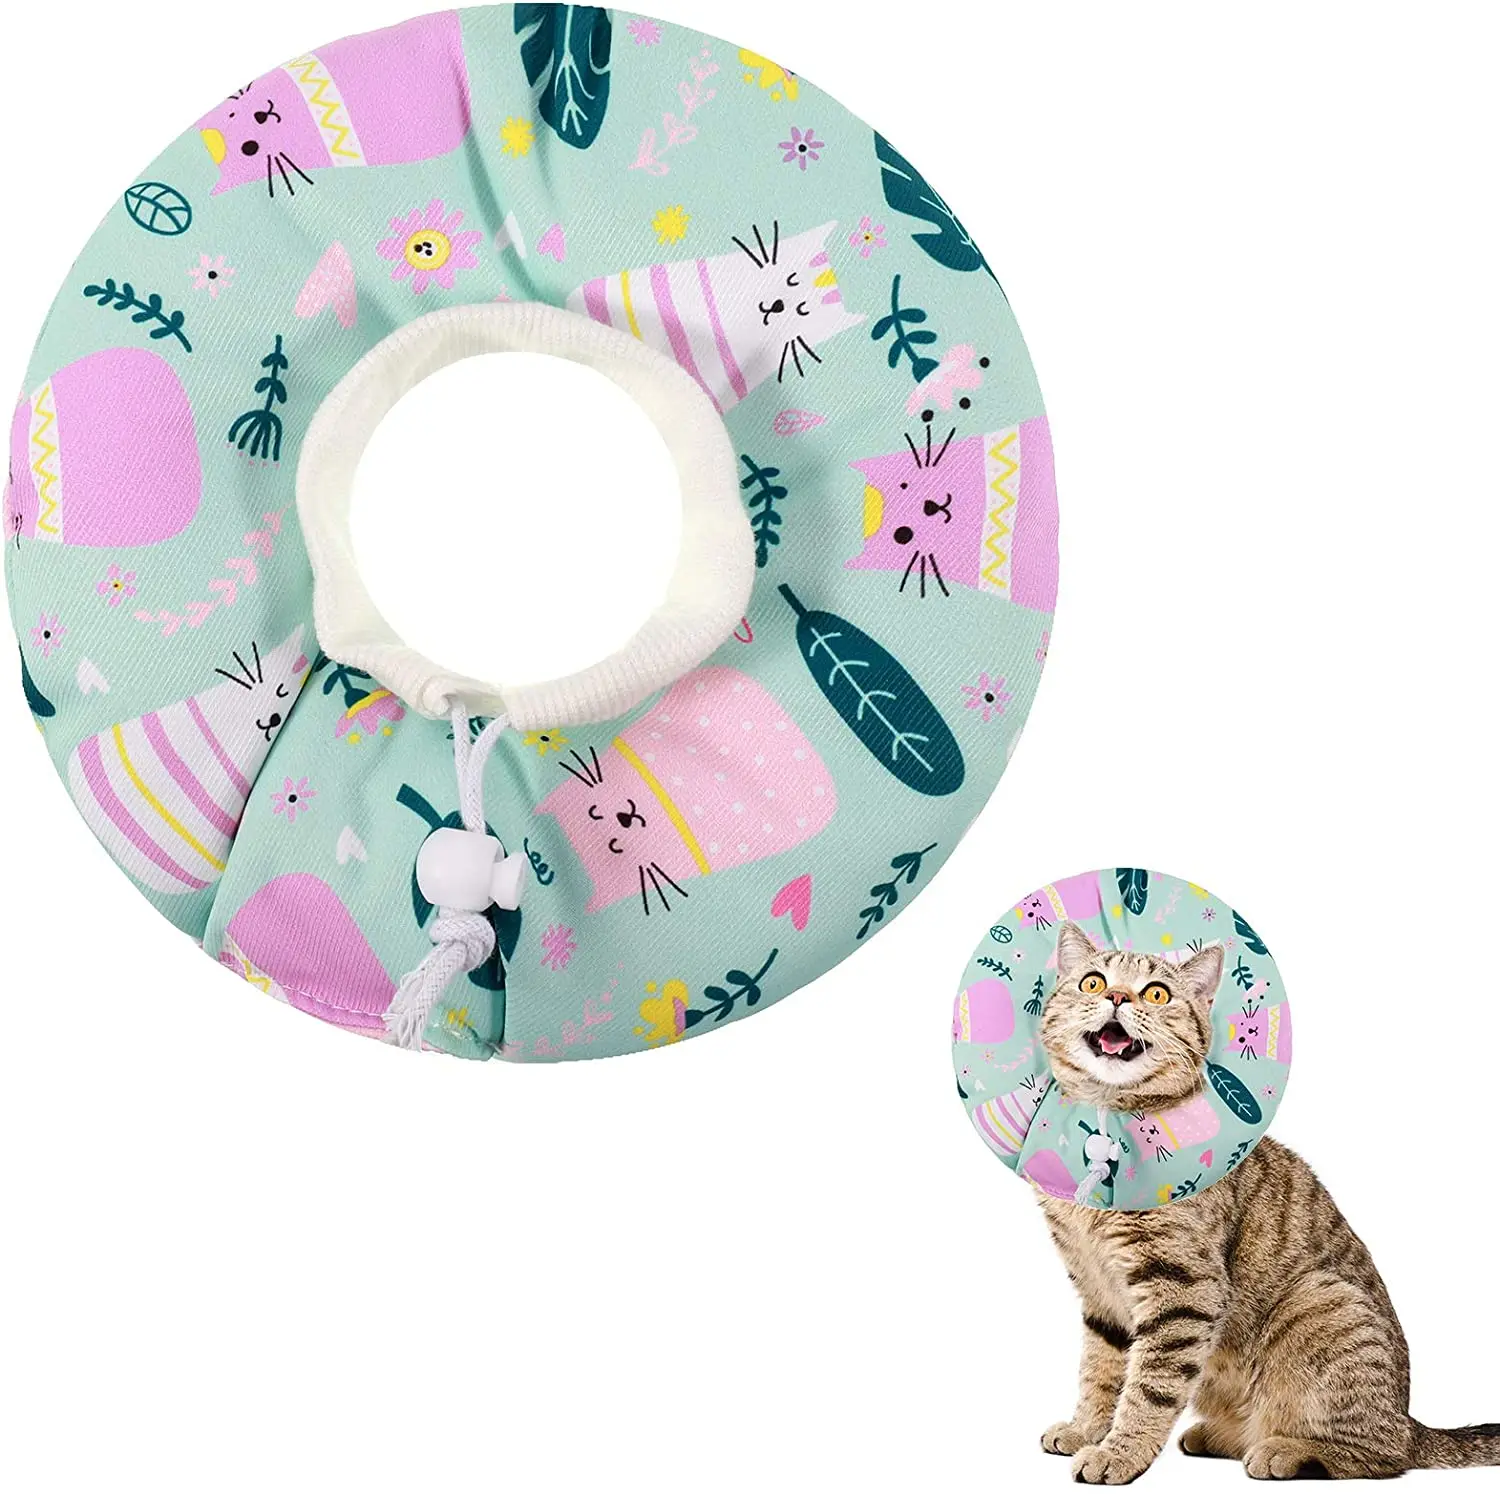 

Advocator OEM/ODM Cat Cone Pet Kitten Soft Protective Neck After Surgery Adjustable Healing Elizabeth dog recovery Collar Comfy, Customized color